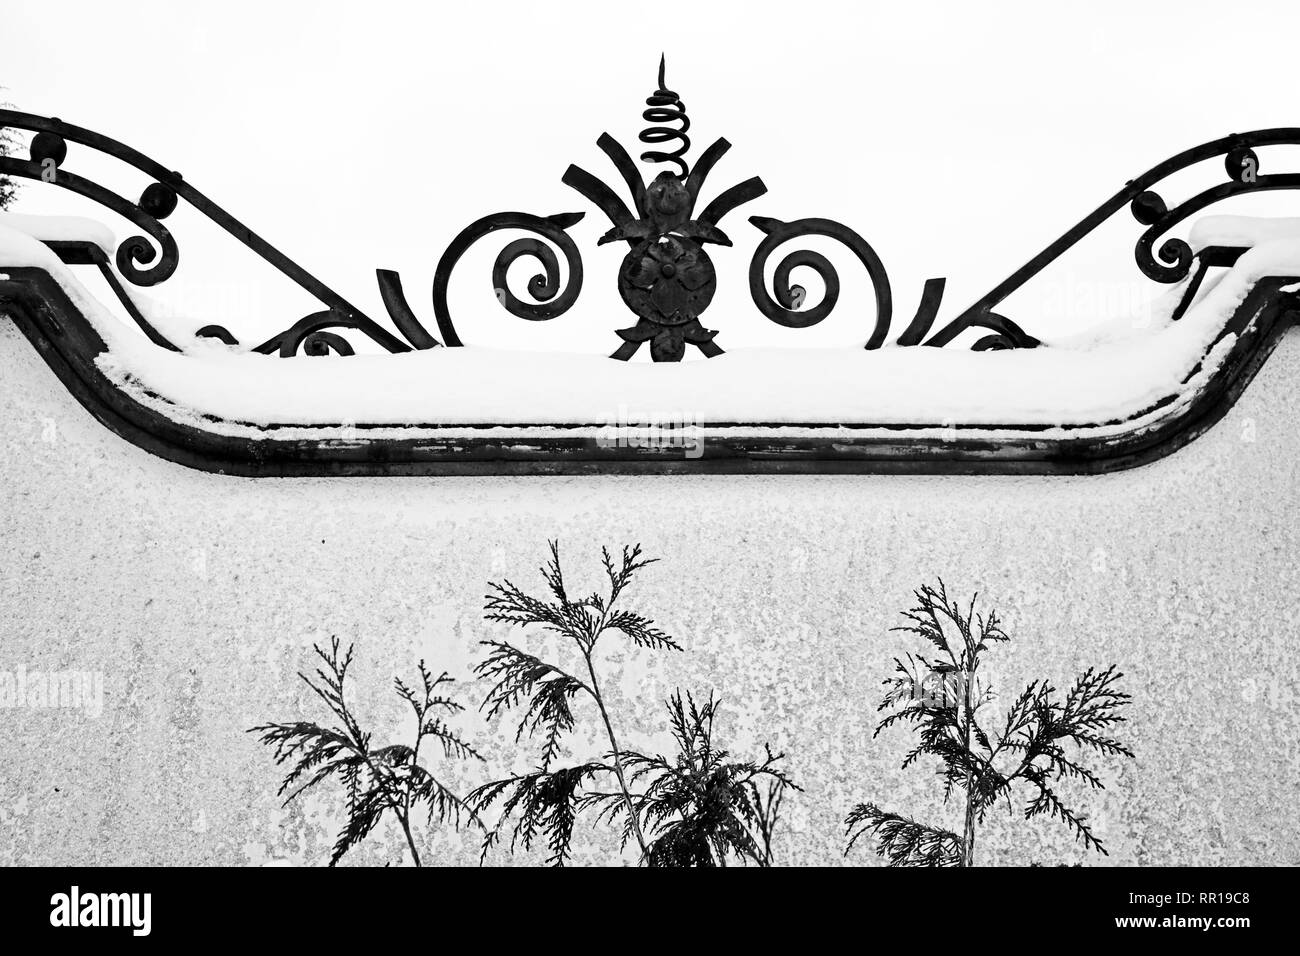 Silhouette of fern leaves against snowed stone fence with iron decoration on top, black and white image Stock Photo